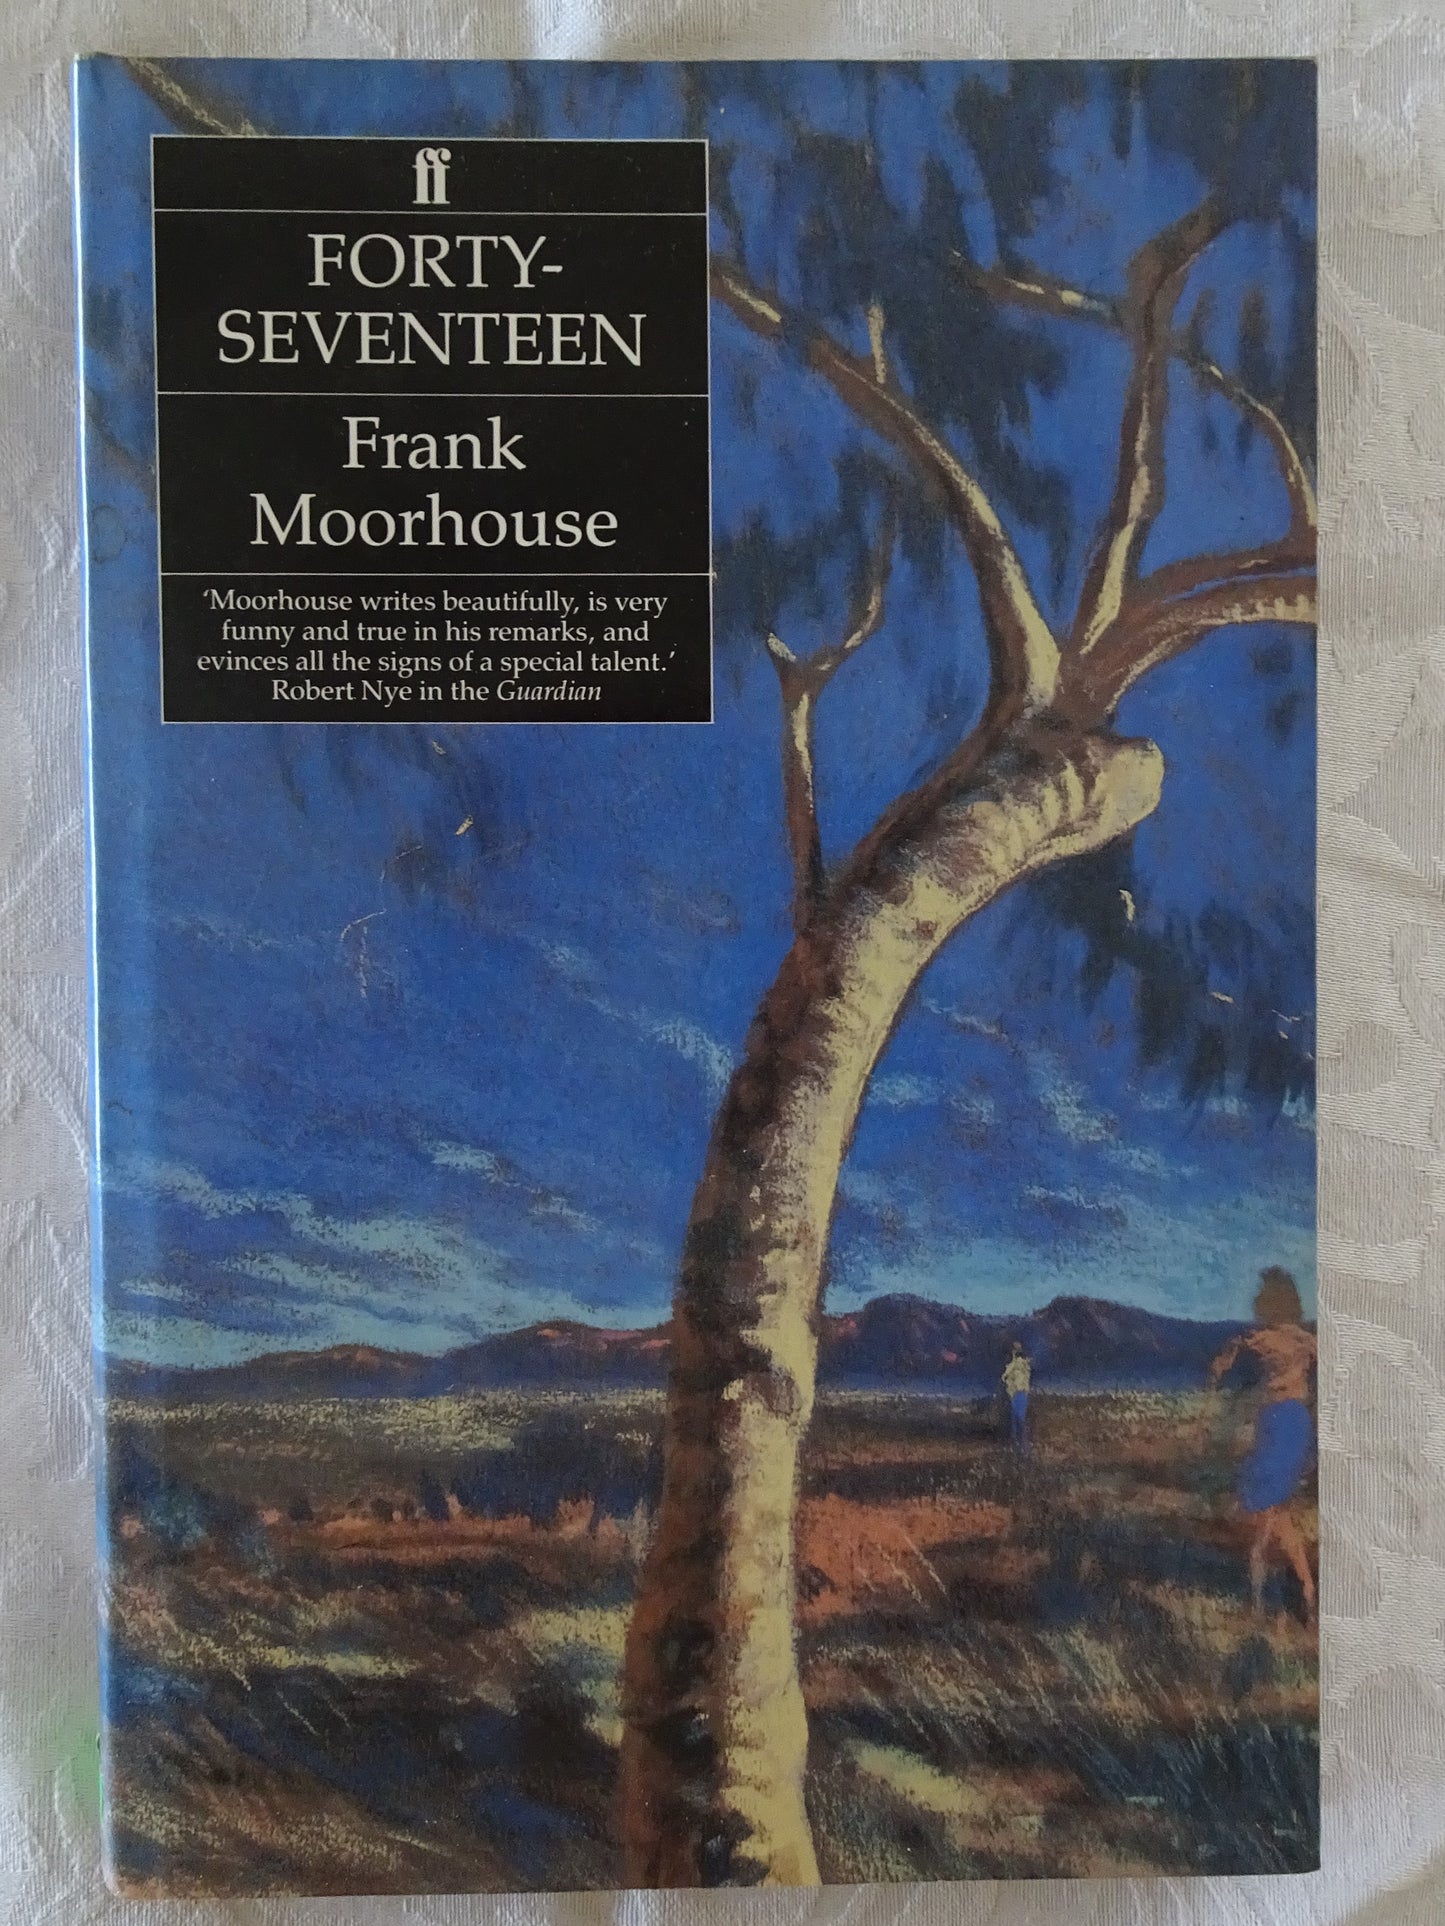 Forty-Seventeen by Frank Moorhouse